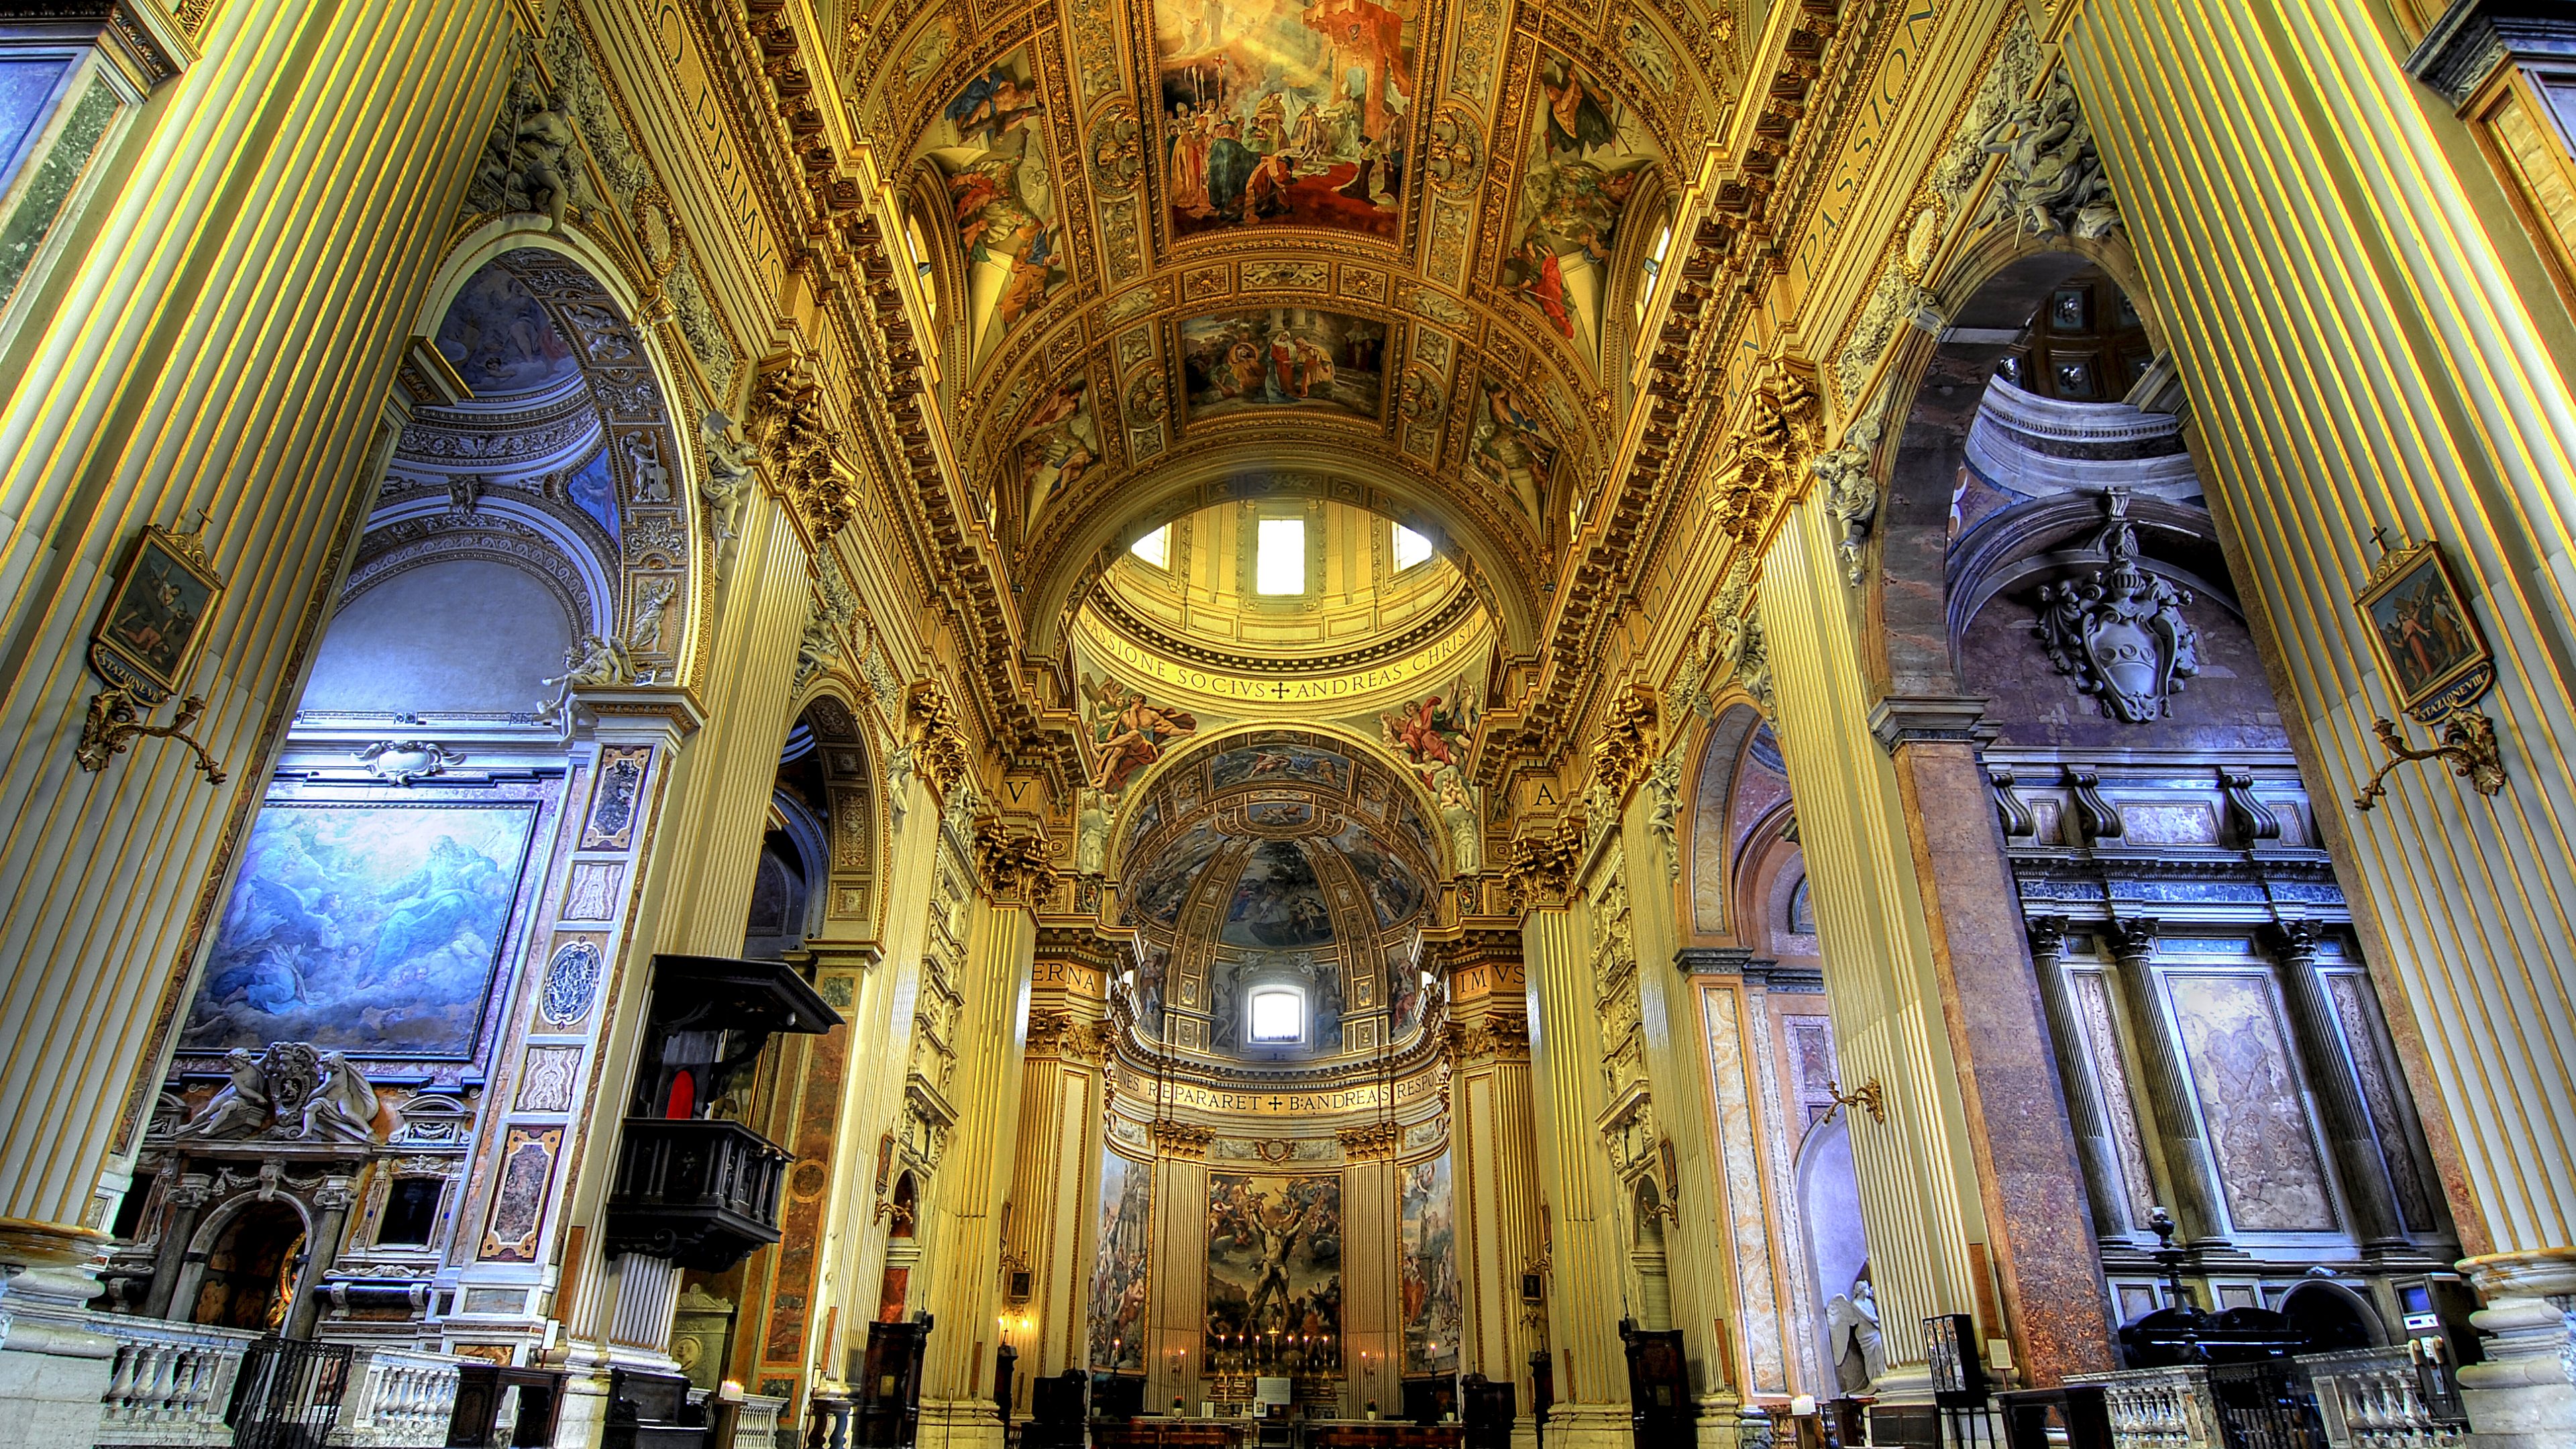 Gilded Architecture in Cathedral by Riccardo Cuppini